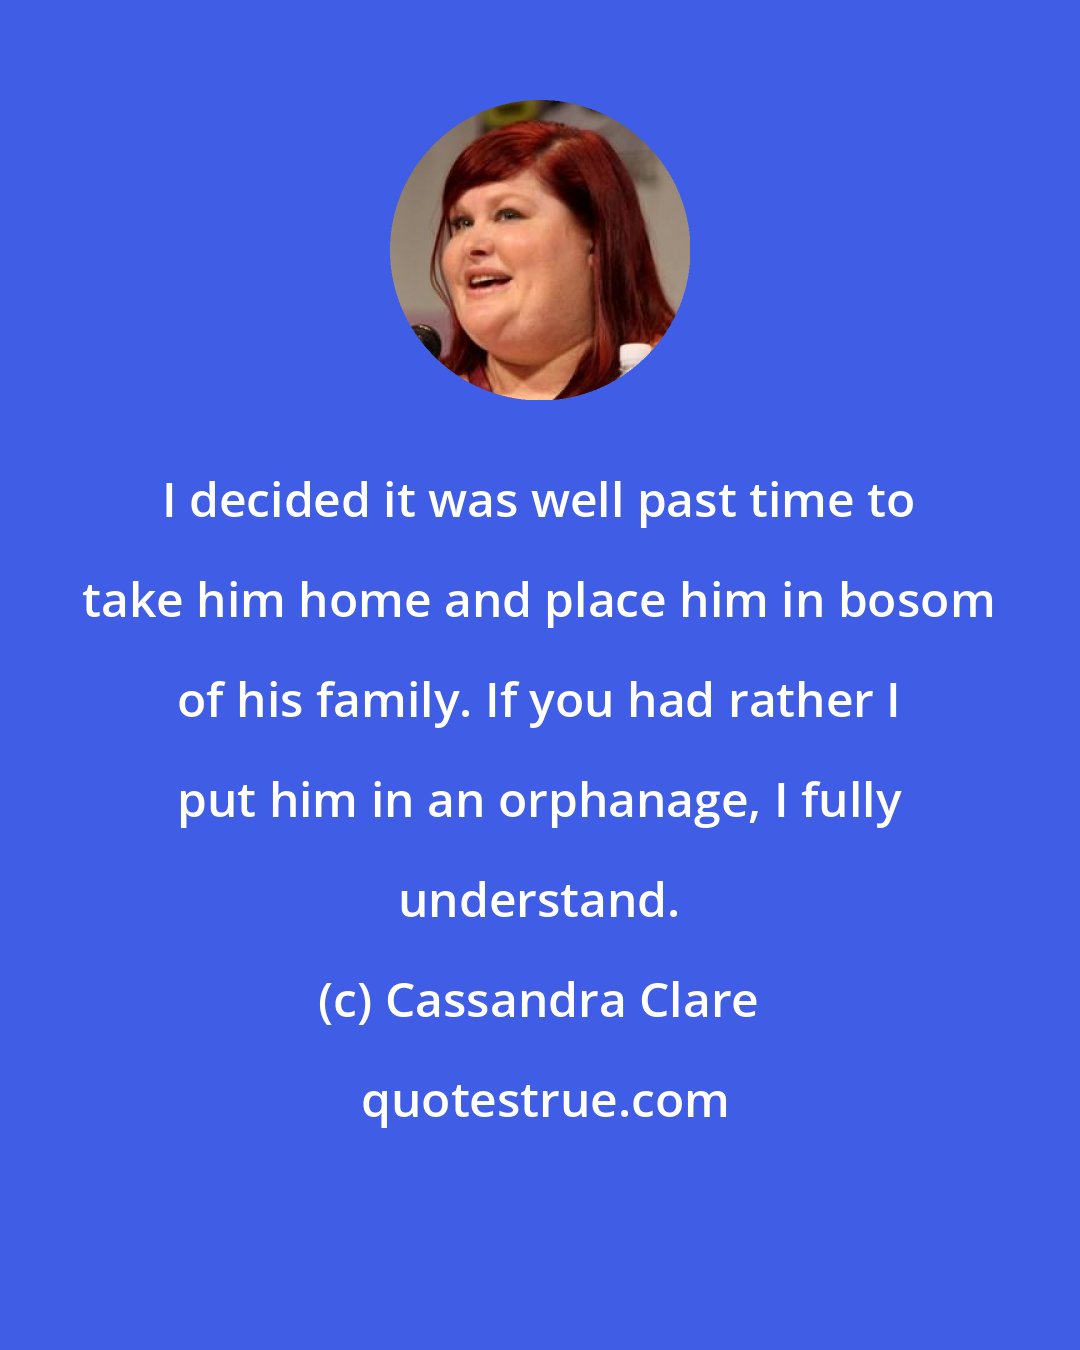 Cassandra Clare: I decided it was well past time to take him home and place him in bosom of his family. If you had rather I put him in an orphanage, I fully understand.